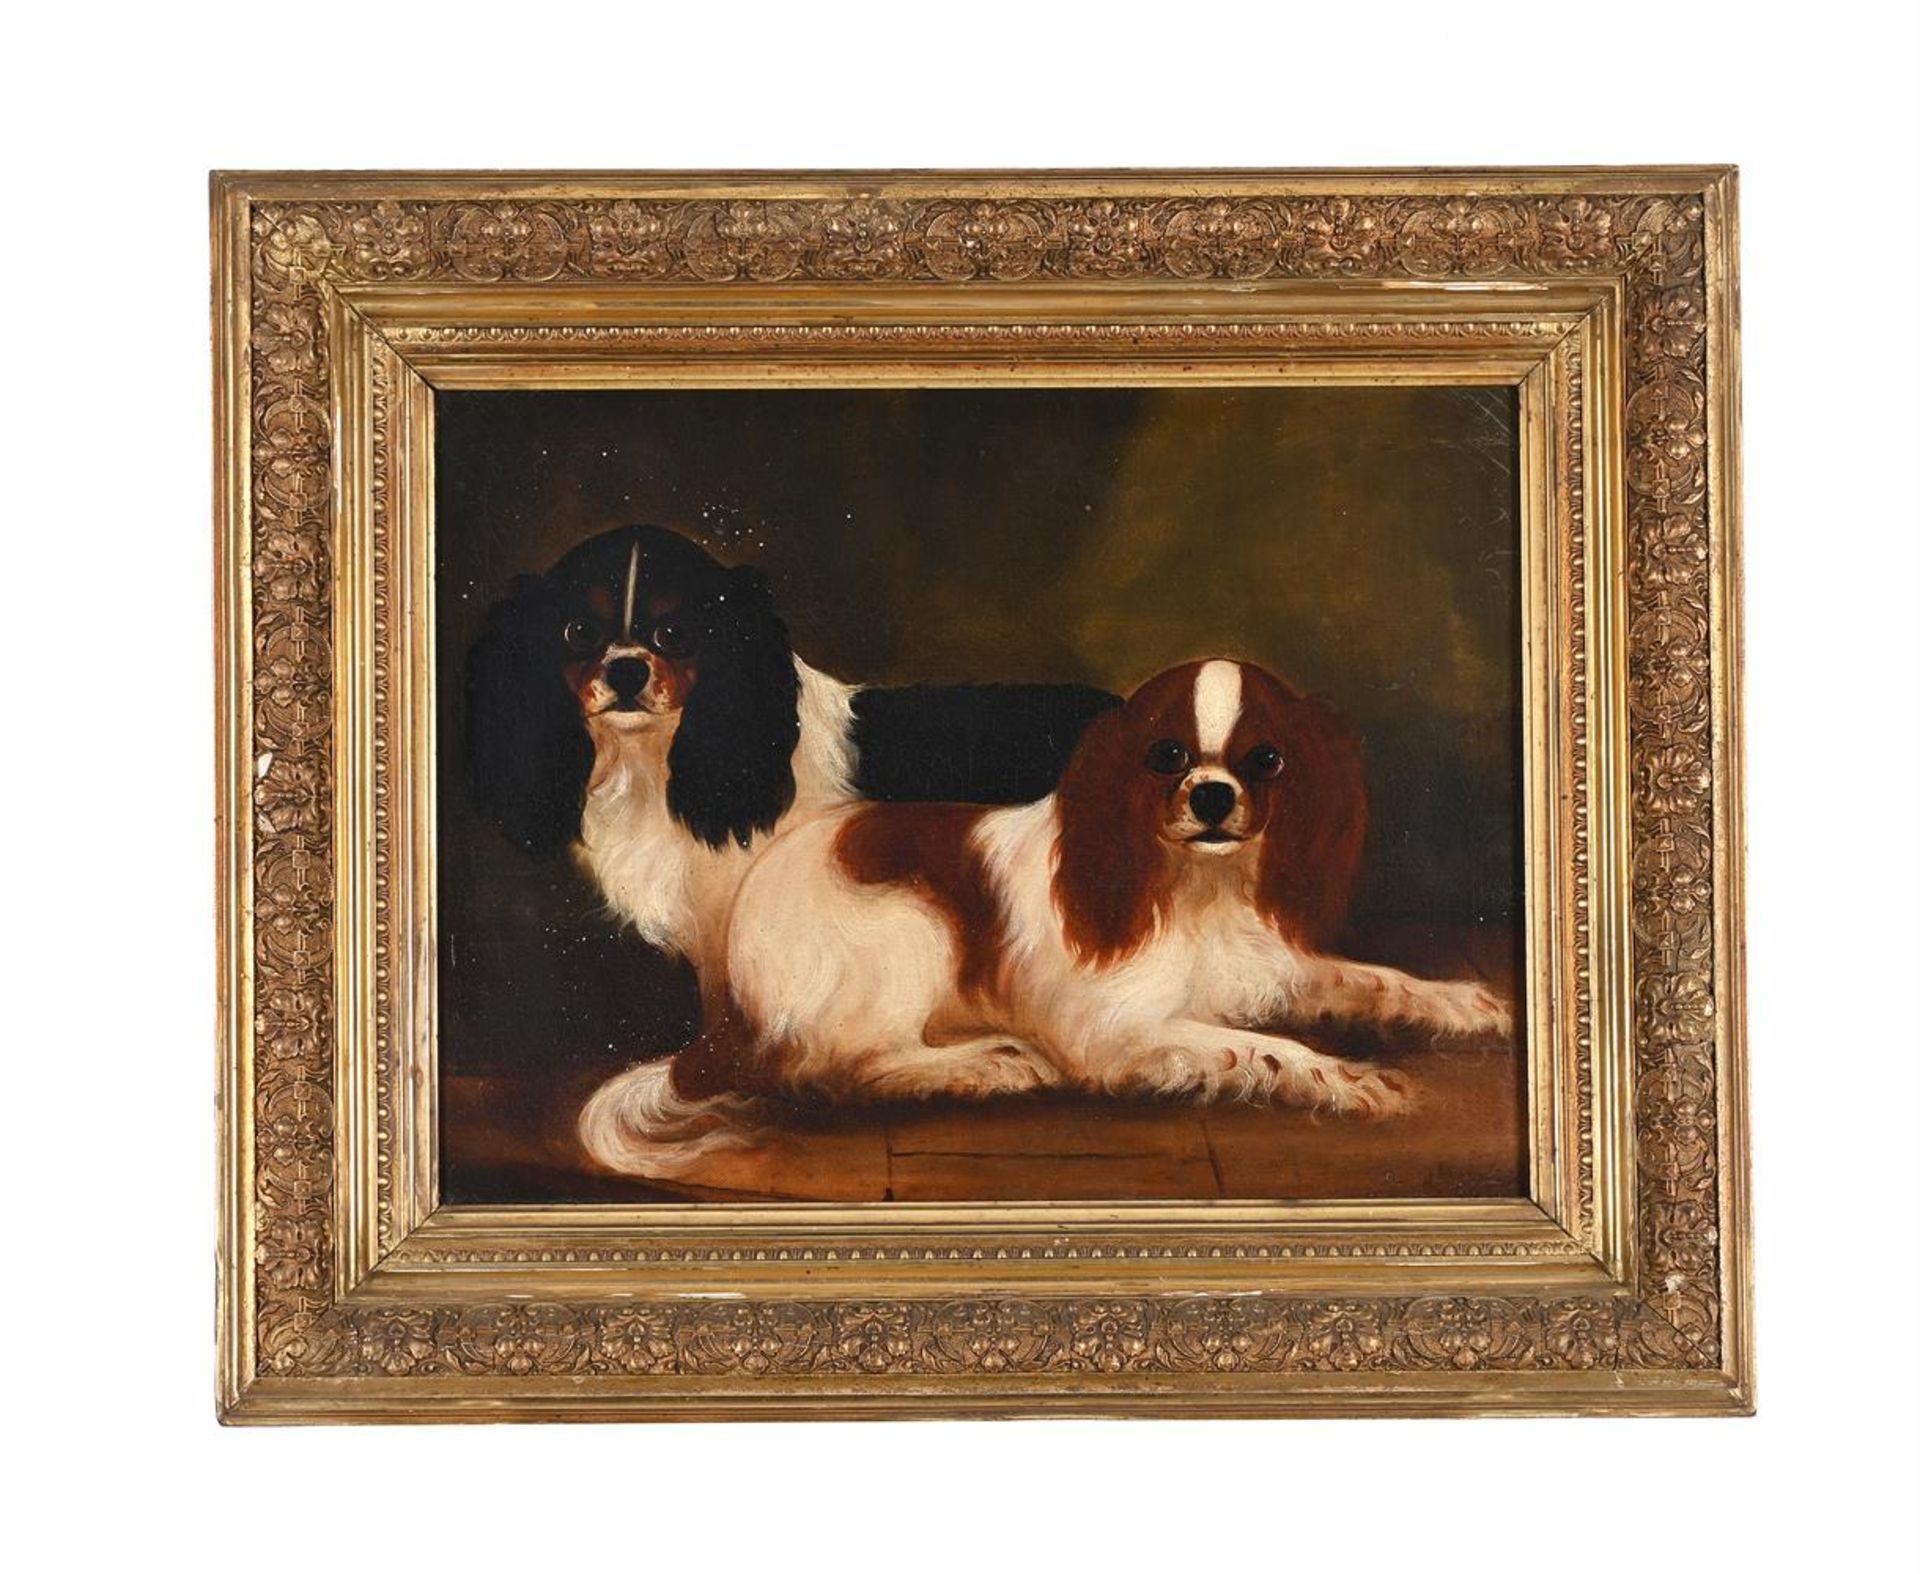 BRITISH PROVINCIAL SCHOOL (19TH CENTURY), A PAIR OF SPANIELS - Image 2 of 5